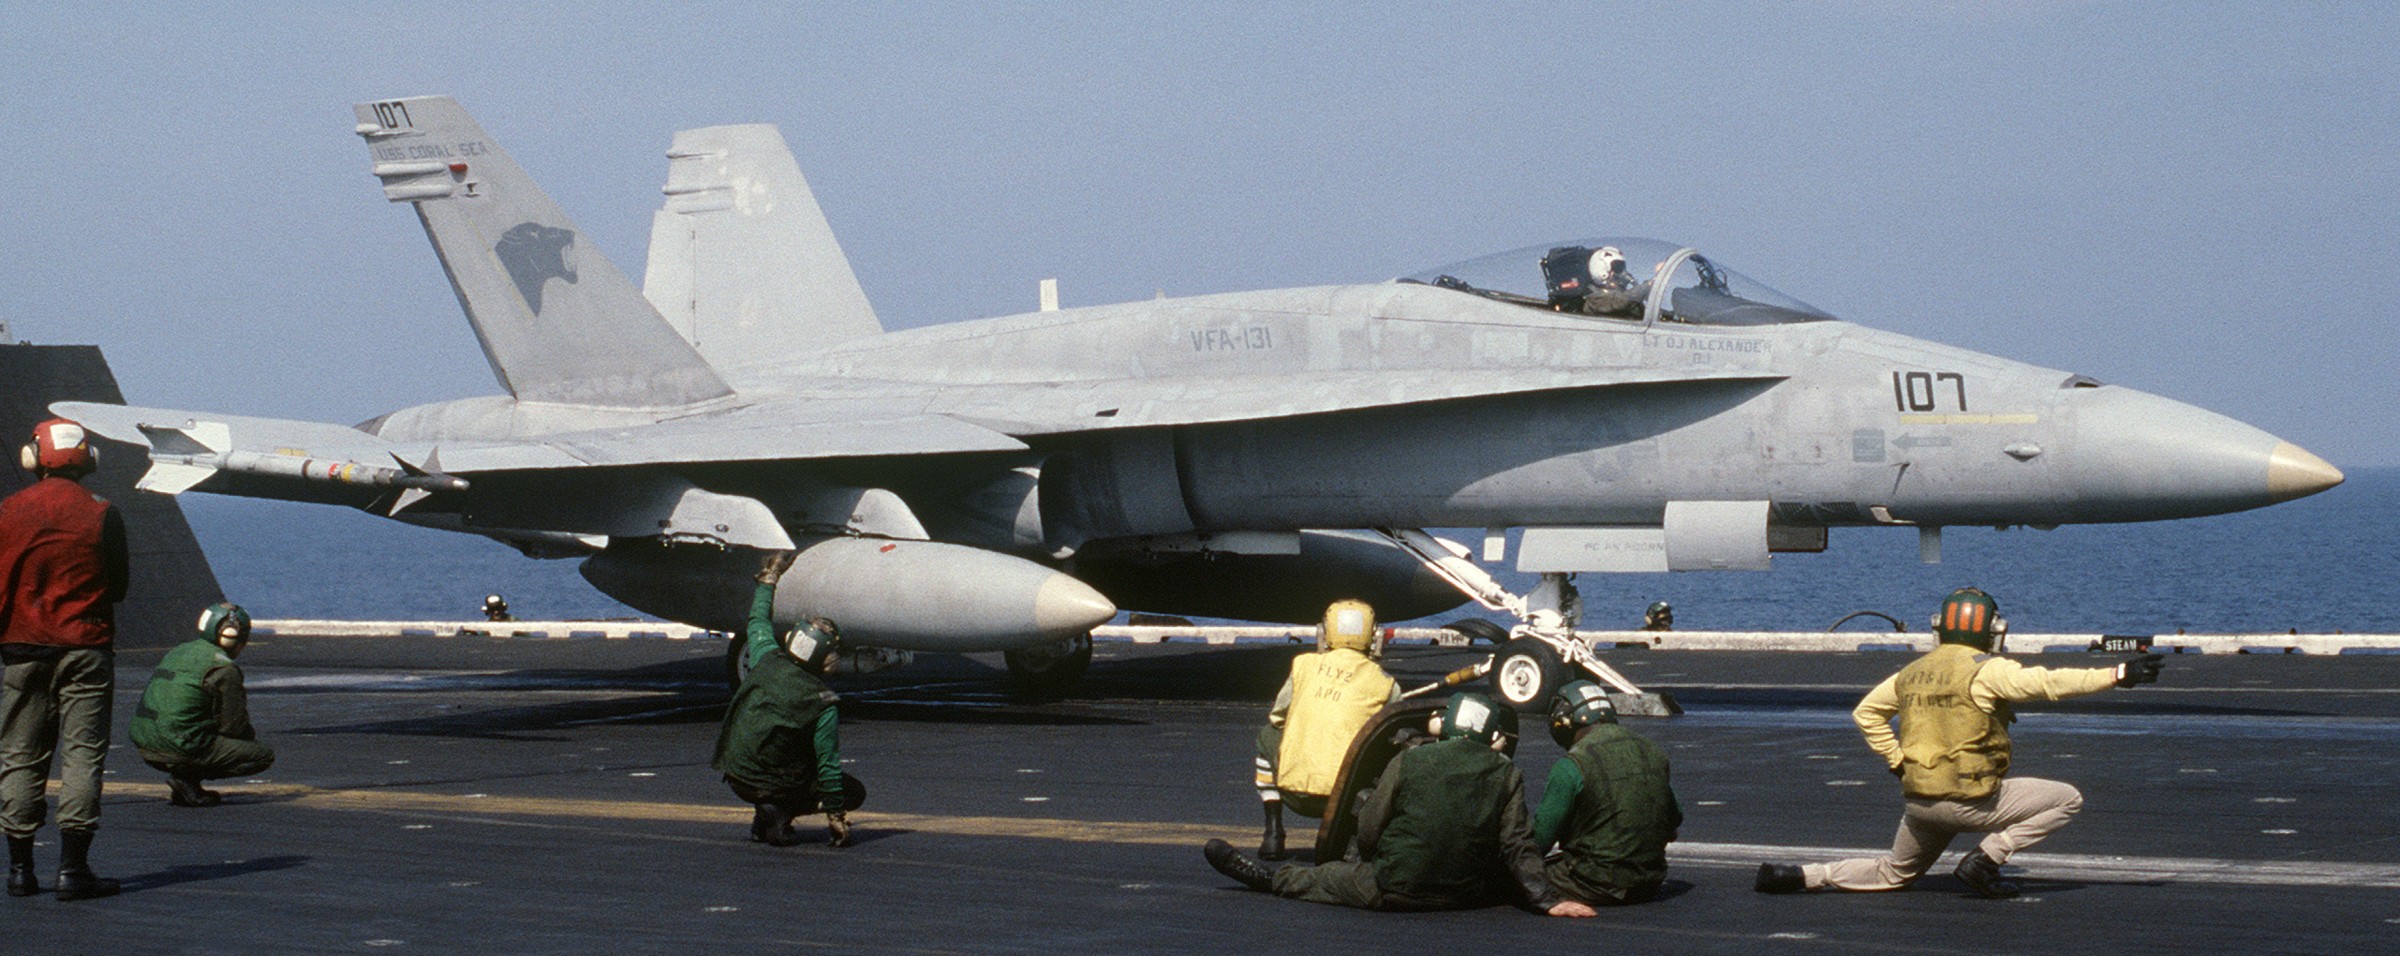 vfa-131 wildcats strike fighter squadron f/a-18c hornet carrier air wing cvw-13 uss coral sea cv-43 1986 129 off lybia